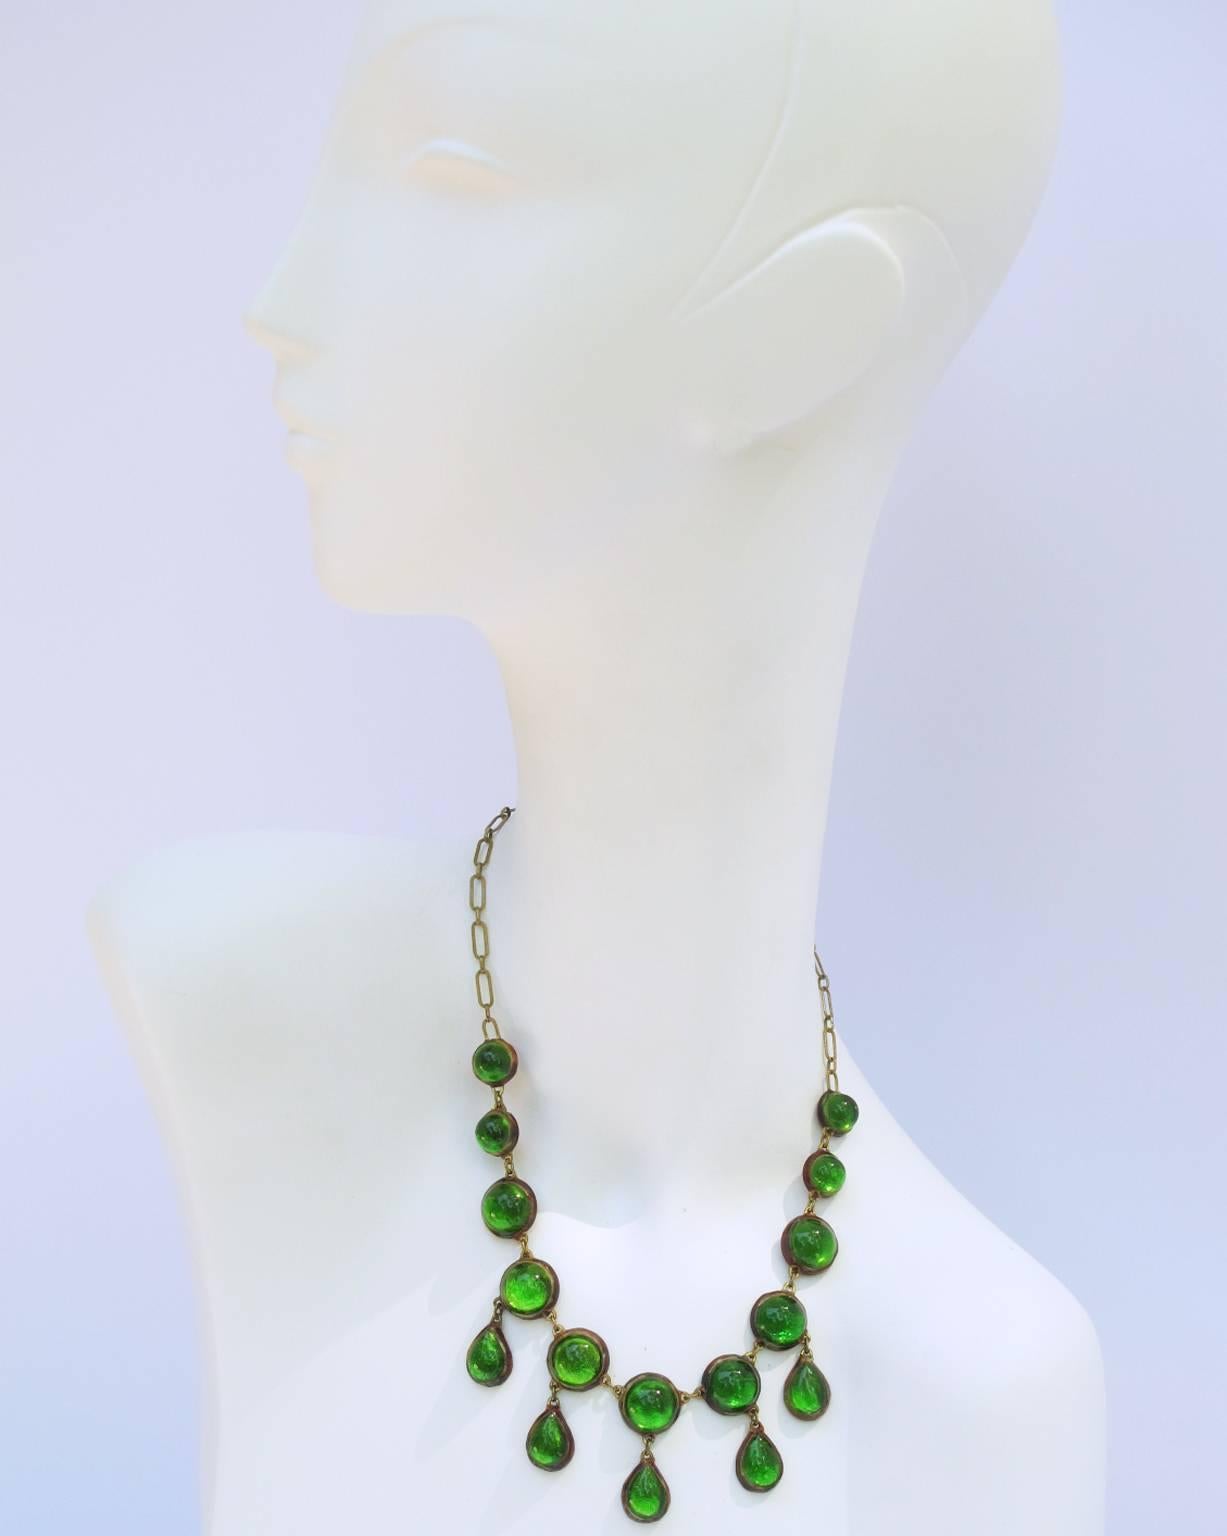 Vintage 1960s Talosel Necklace executed by one of the student of Line Vautrin. Brown talosel resin geometric dangling shape with charms, encrusted with green cabochon on silver foil background. Gilt metal chain with hook that can be adjusted for